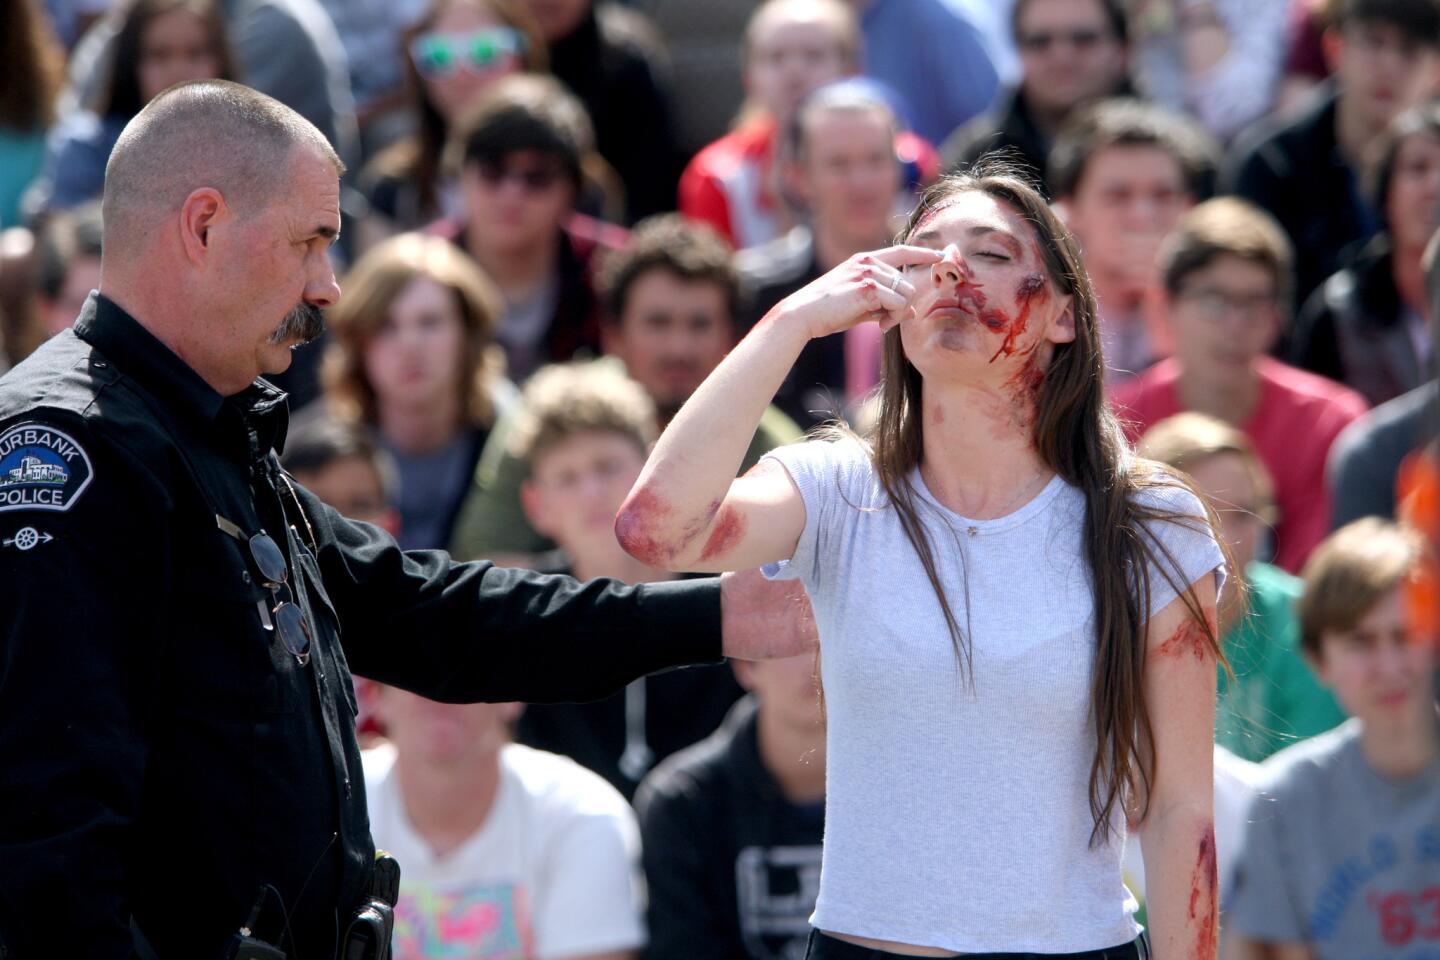 During the "Every 15 Minutes" simulation, Burbank police officer Todd Burns gives sobriety test to actor and student Emily Cox, in front of Burroughs High School, in Burbank on Thursday, April 21, 2016. "Every 15 Minutes" is a program with real cars, police, fire and coroner dept. personnel and actor students who act out a scene of a multiple-vehicle accident with fatalities. The program warns students on the dangers of drunk driving.